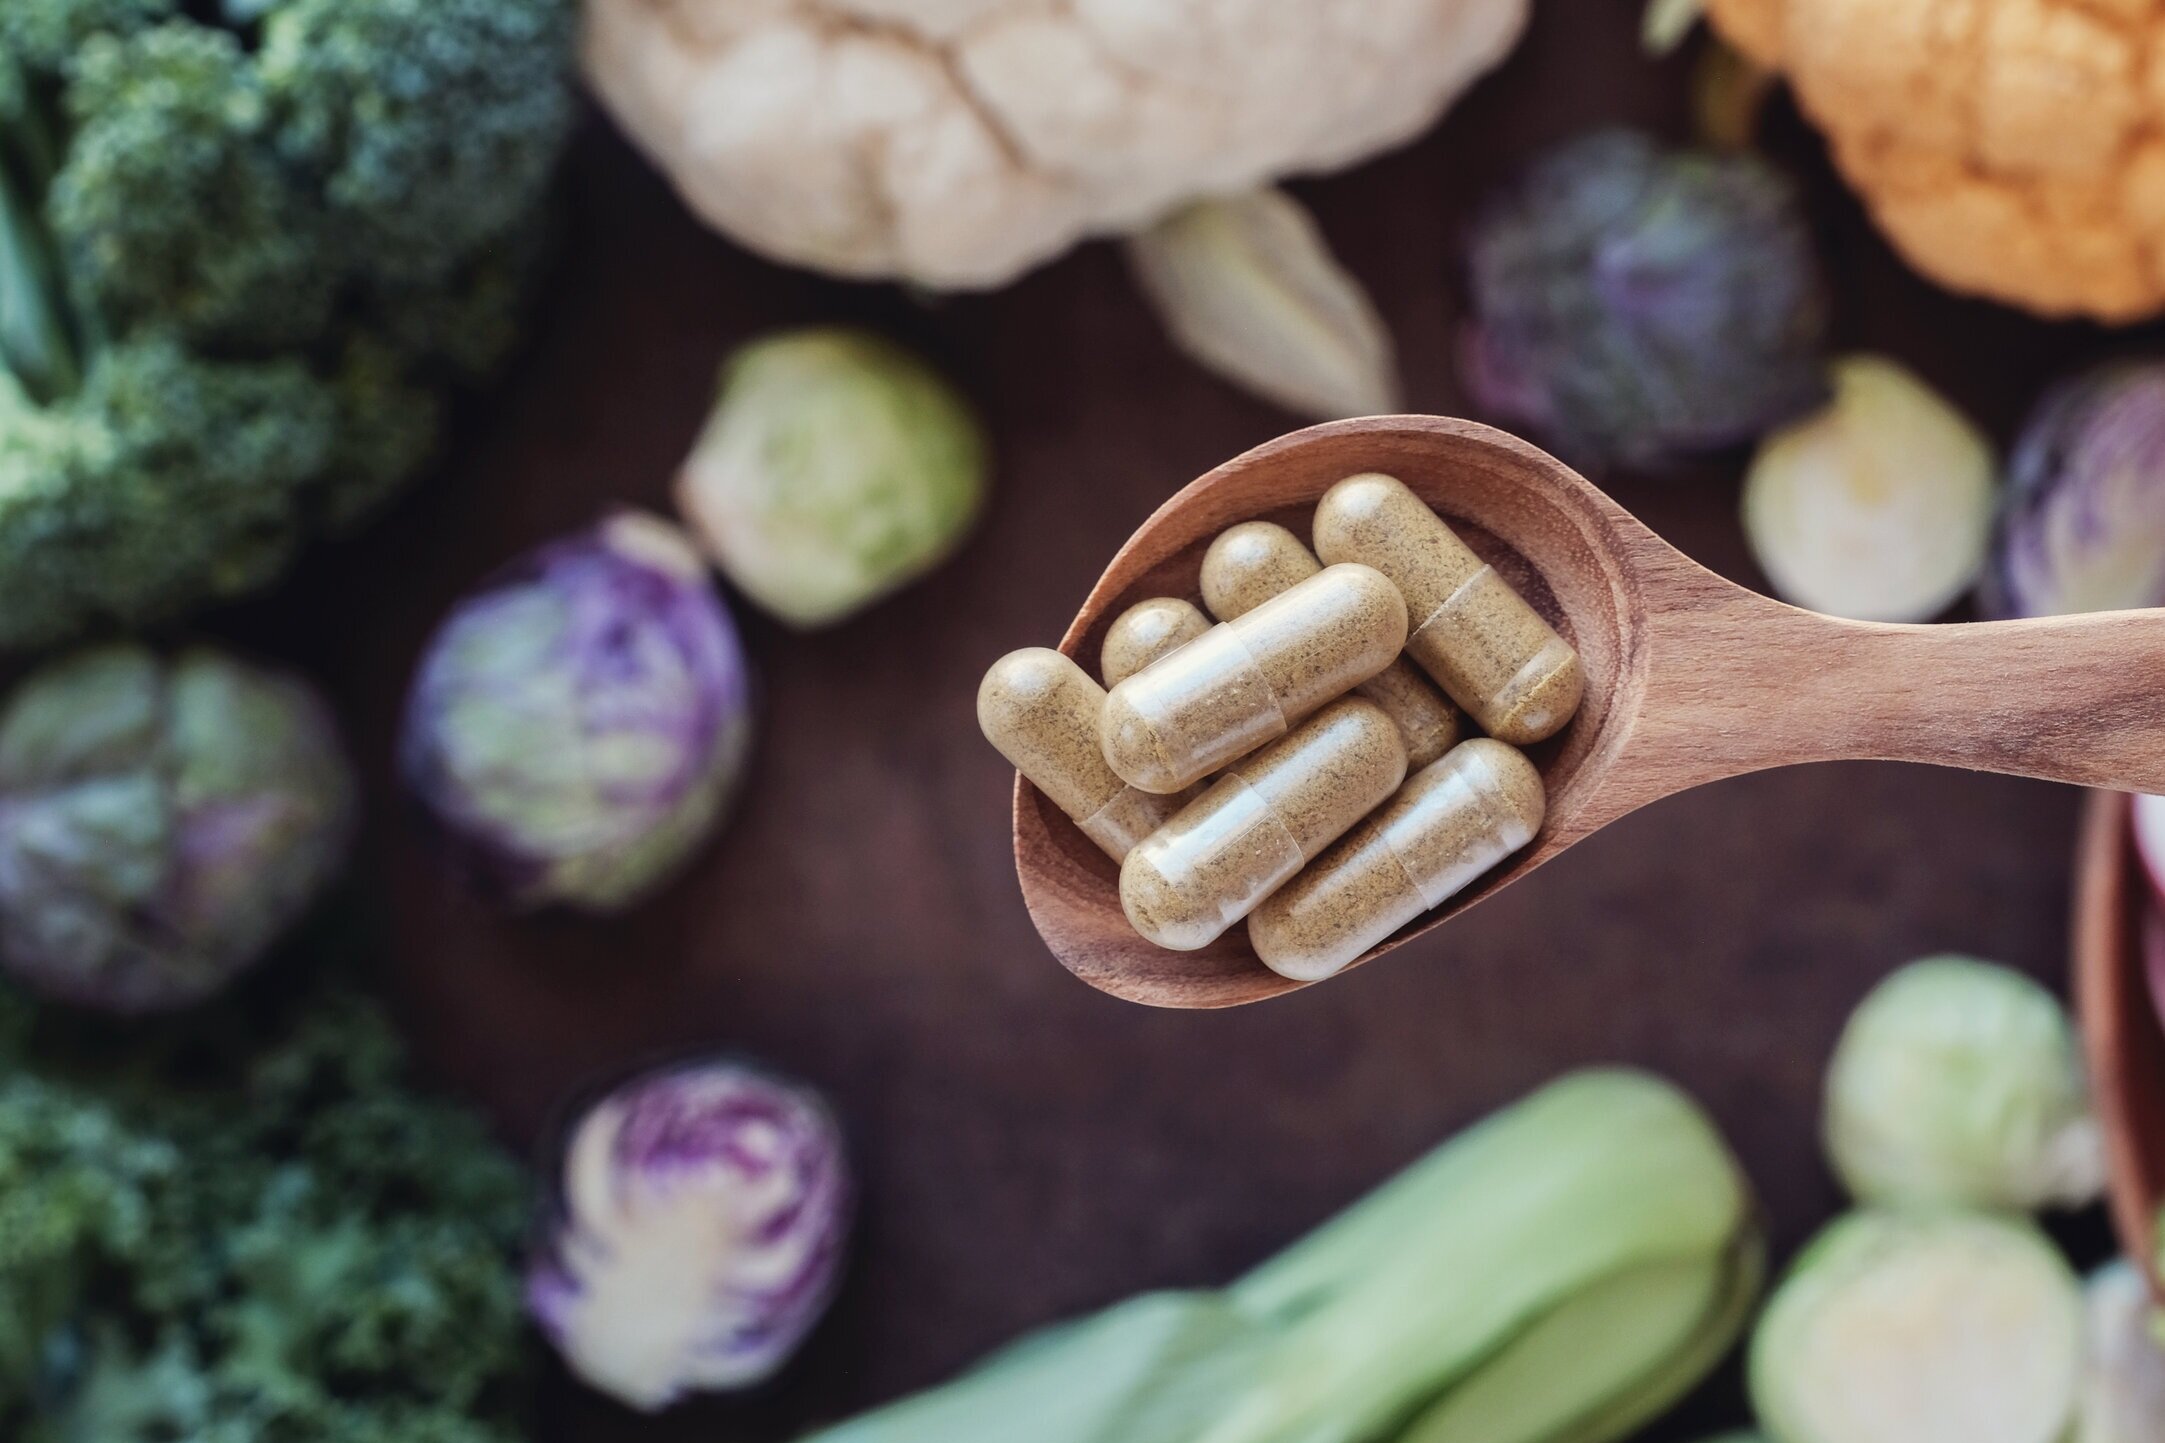 There are a small handful of nutrients to pay attention to that will help you optimise your Veganuary